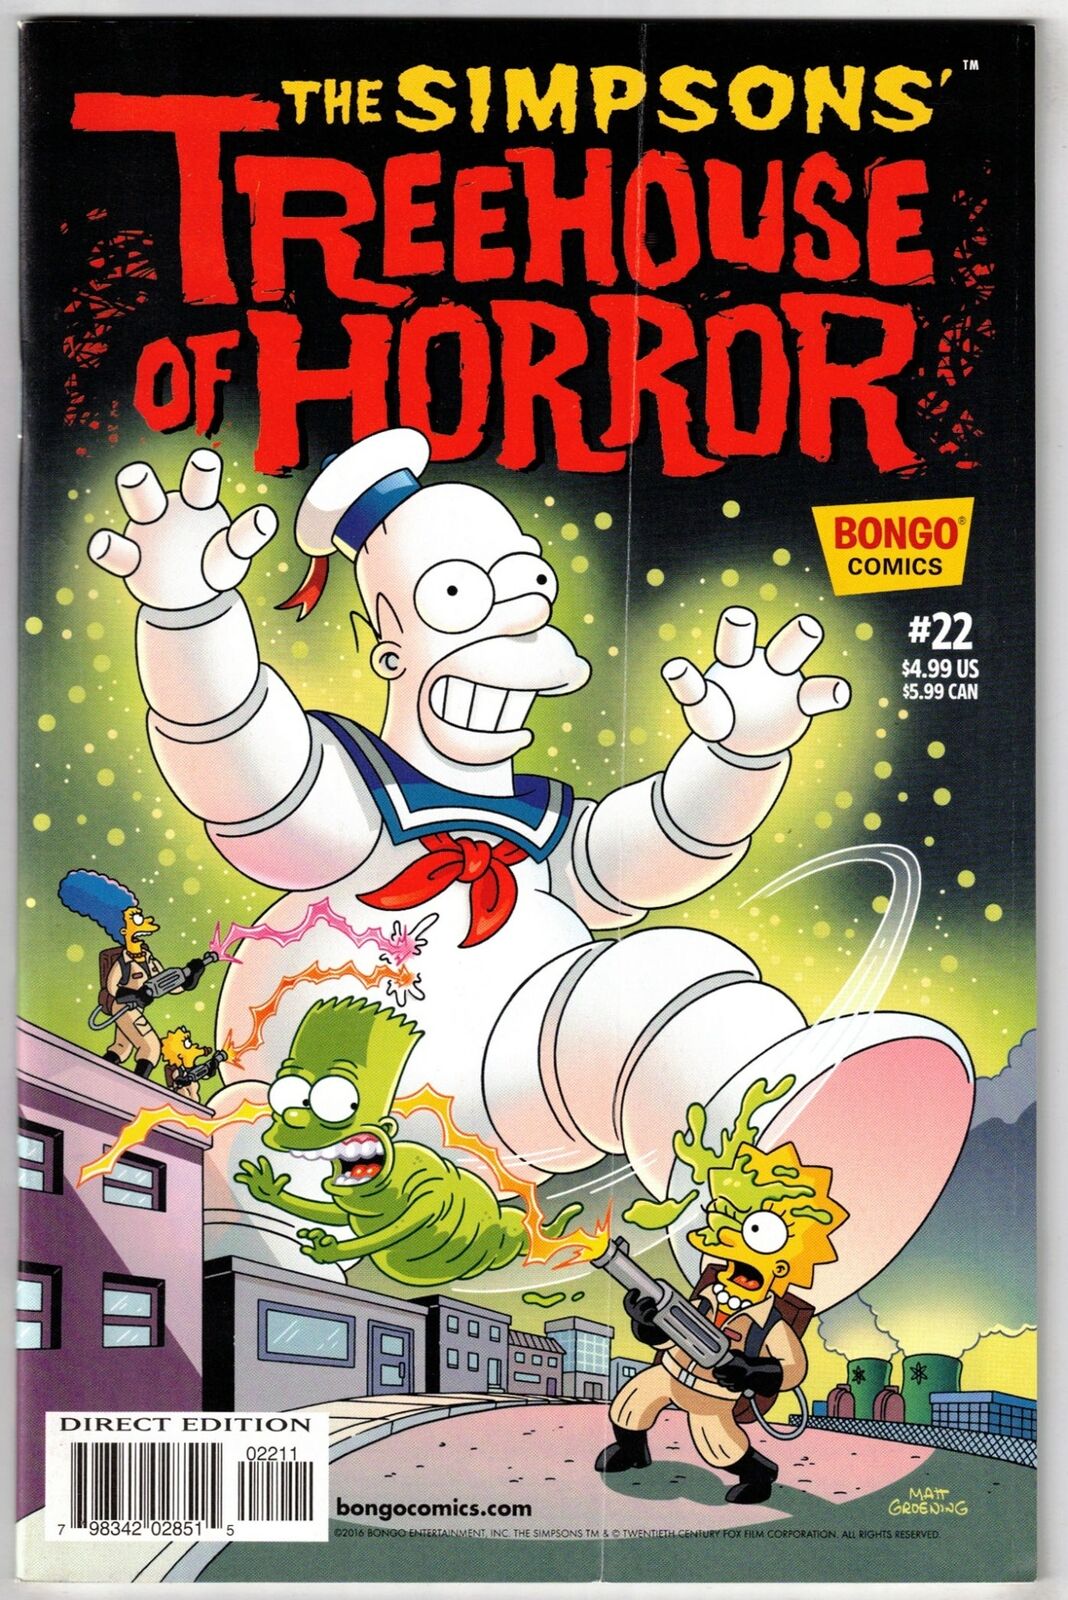 SIMPSONS TREEHOUSE OF HORROR #22 (2016)-GHOSTBUSTERS HOMAGE- LOW PRINT RUN- FINE